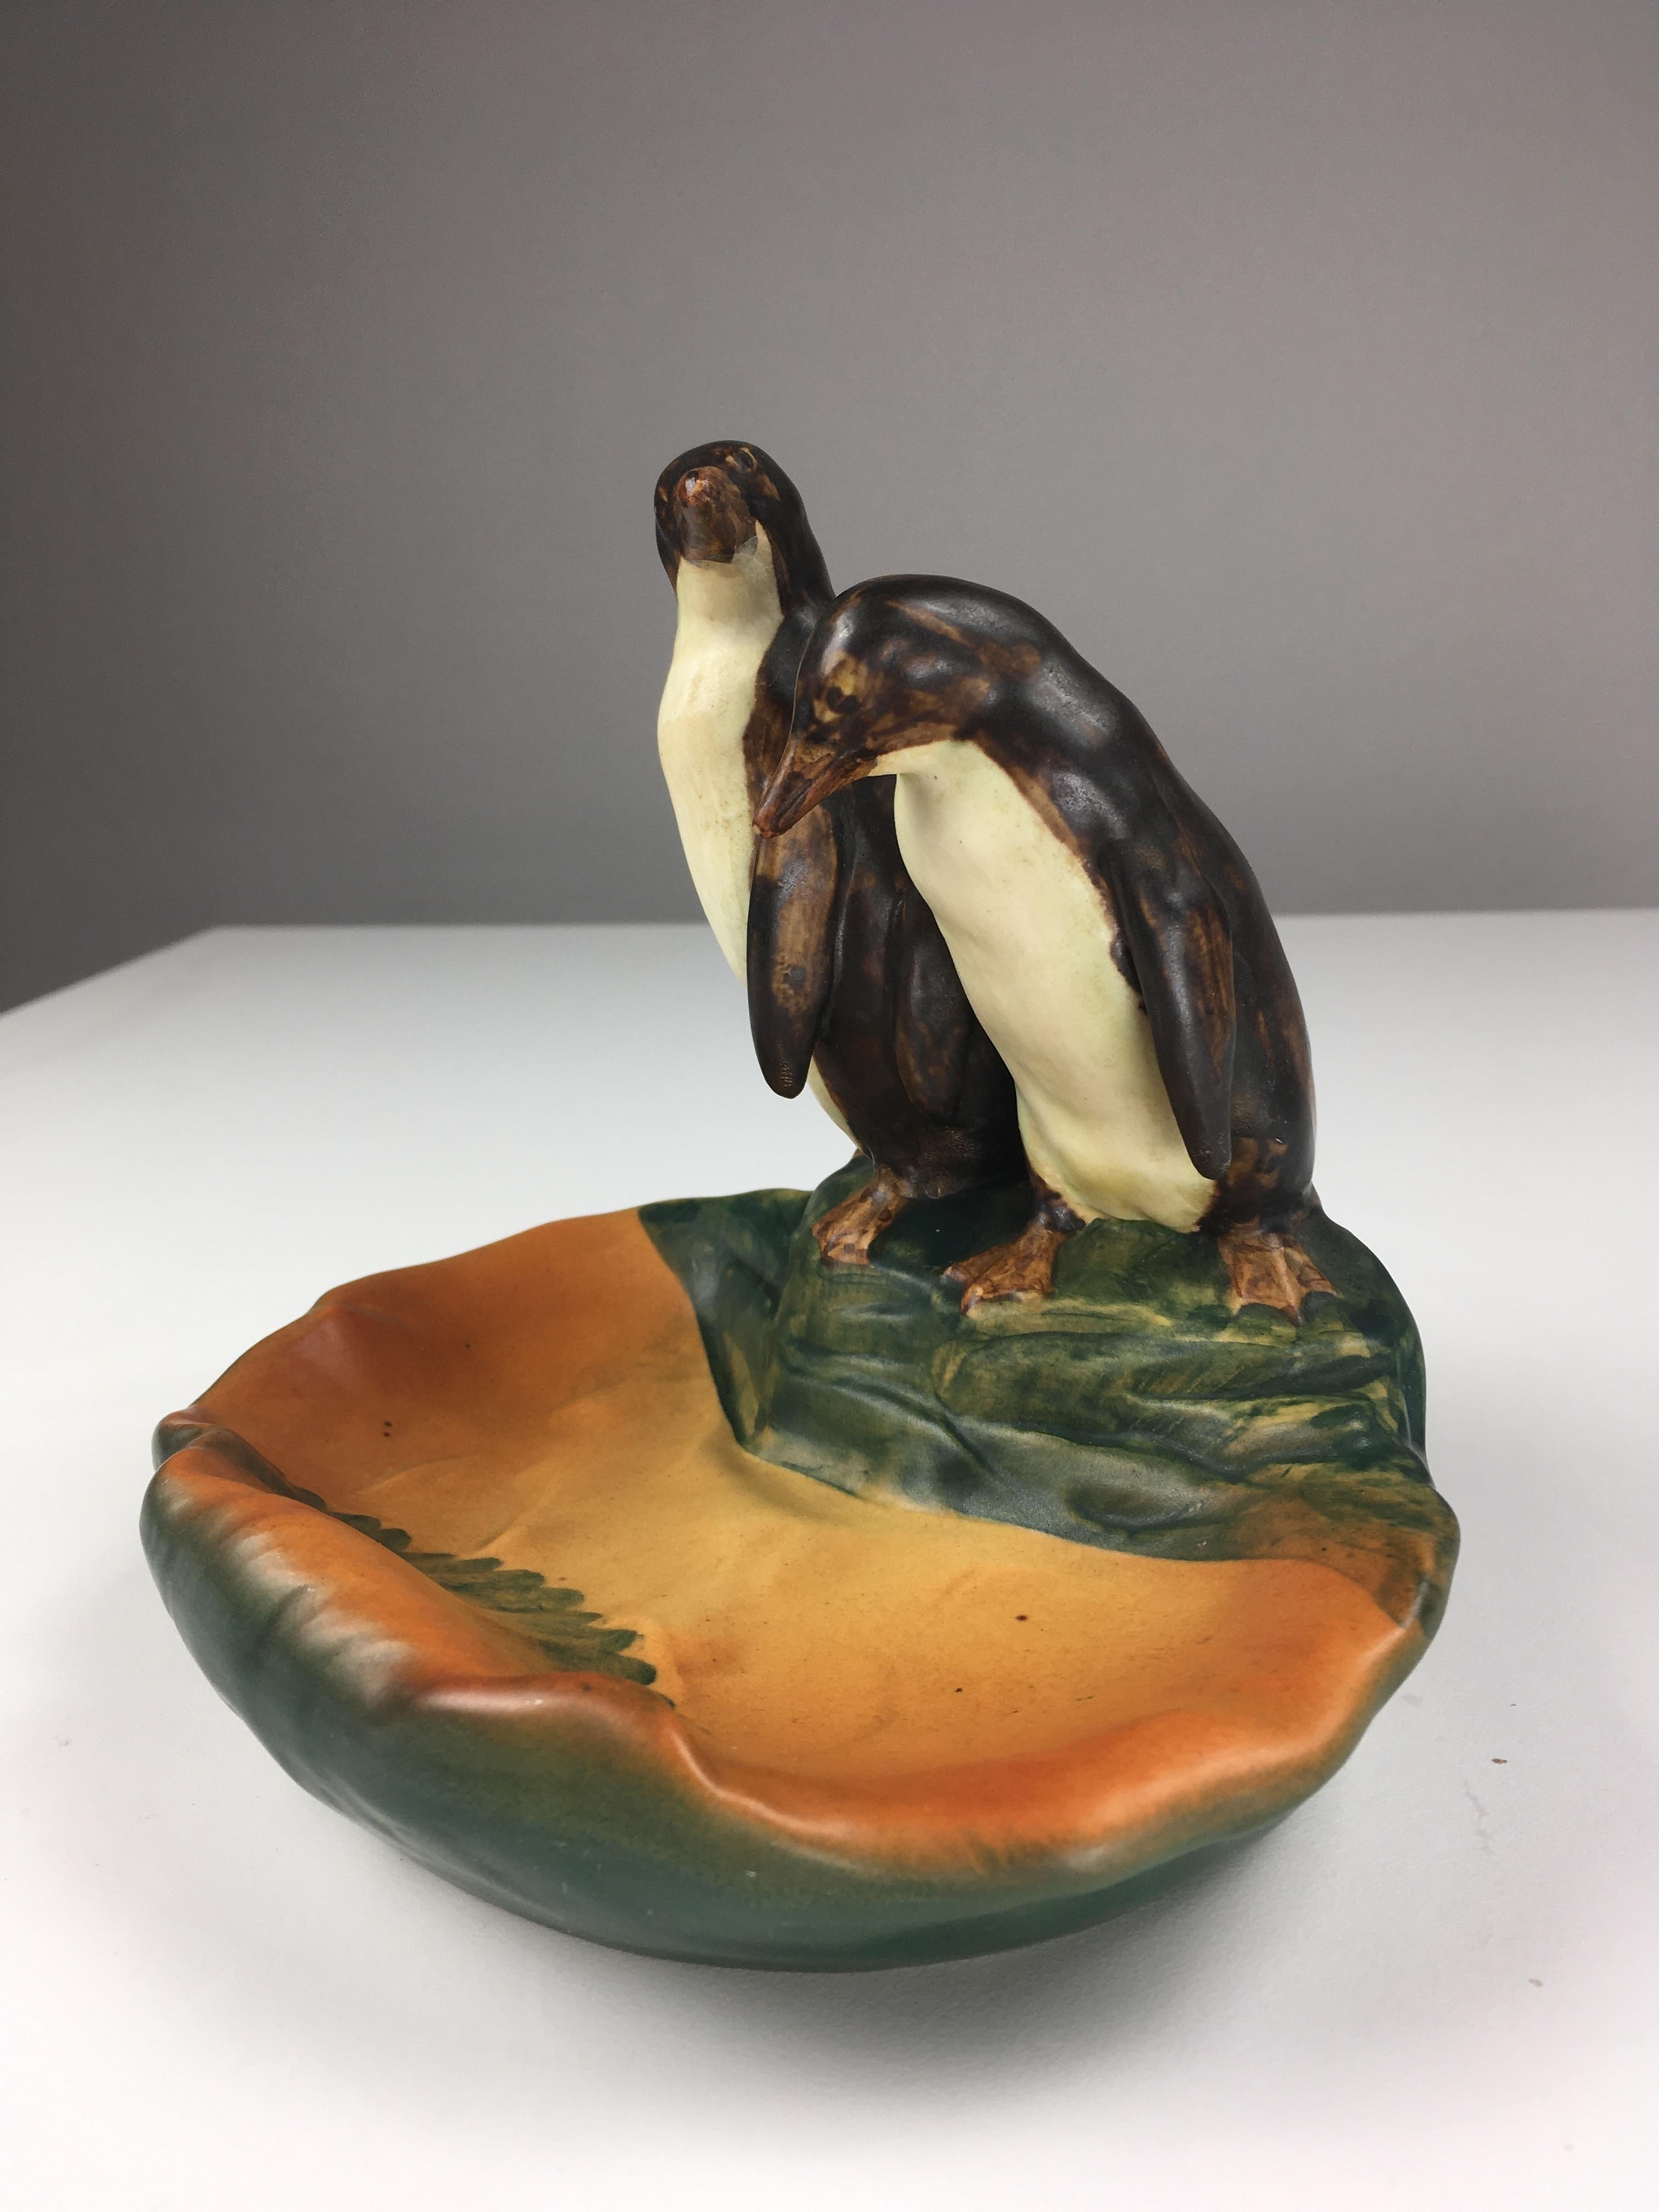 Early 20th Century 1920's Danish Hand-Crafted Art Nouveau Penguin Ash Tray / Bowl by P. Ipsens Enke